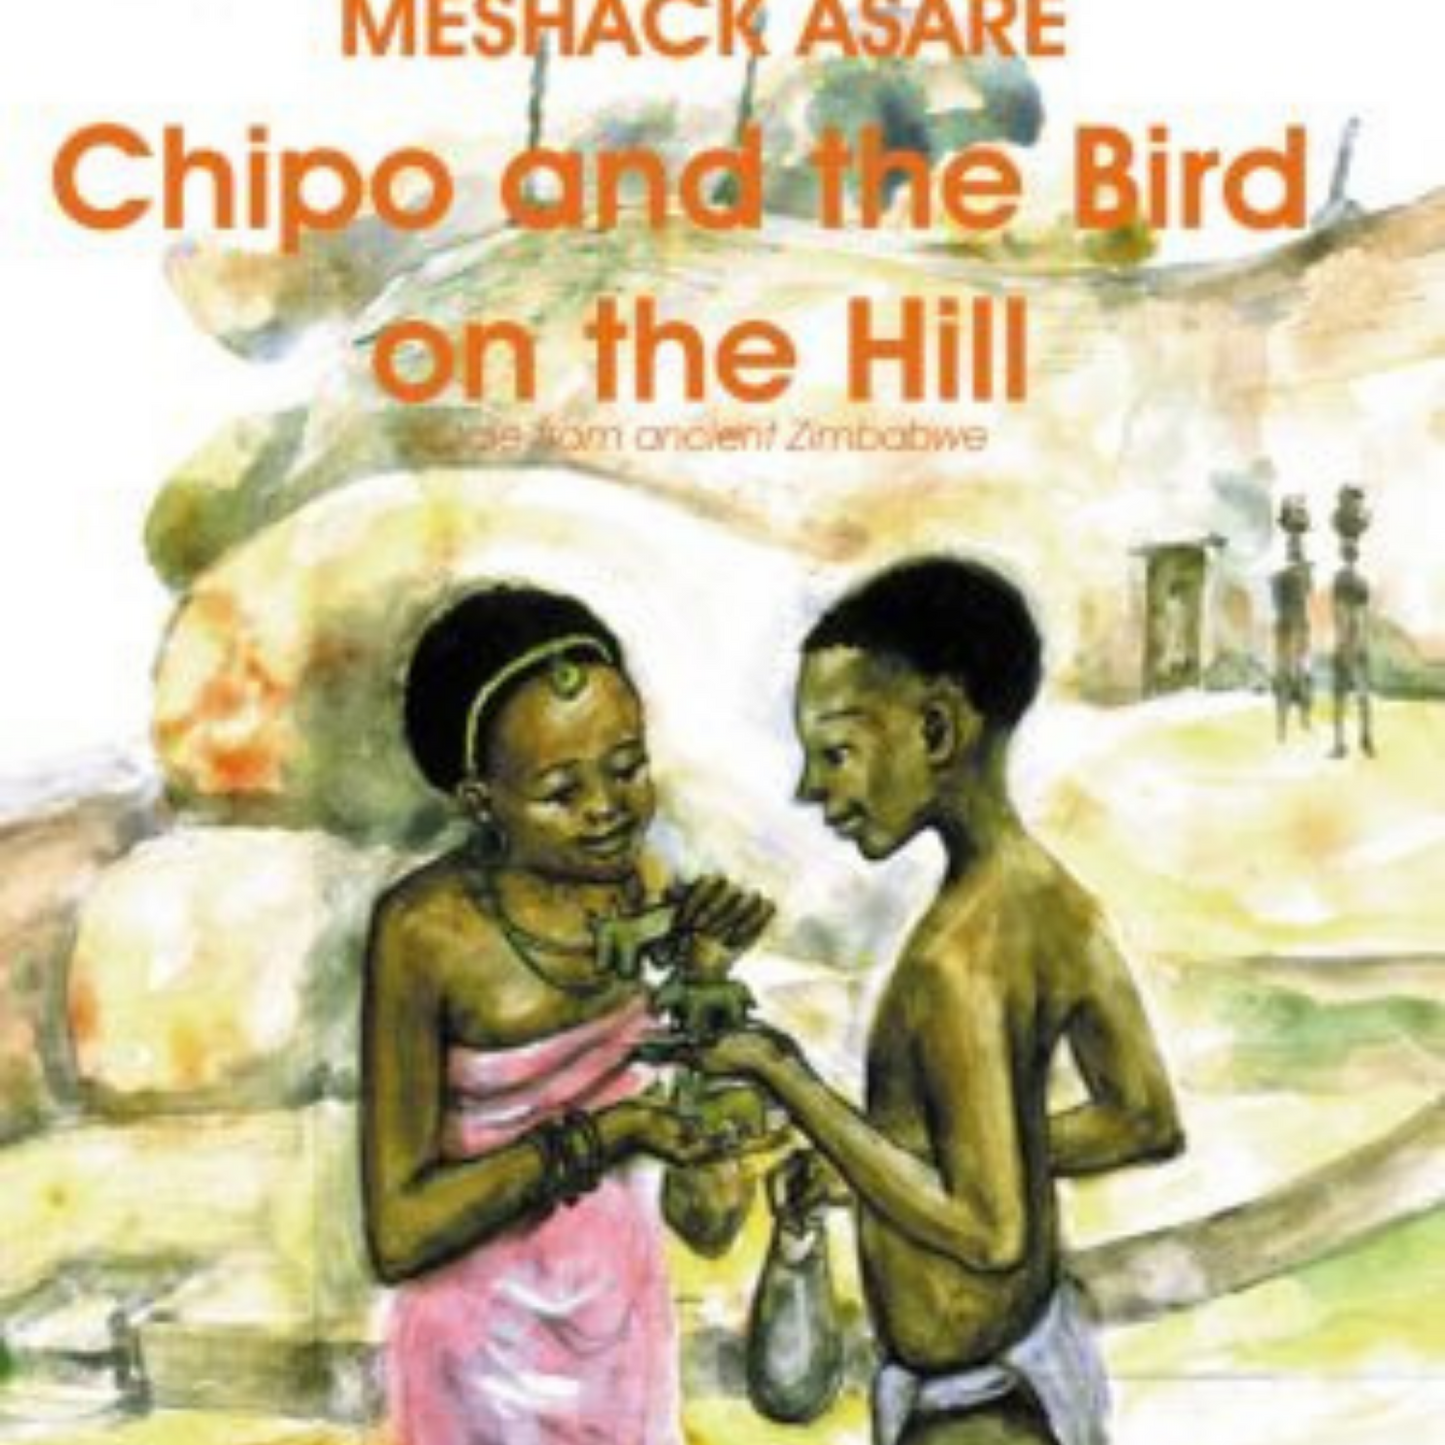 Chipo and the bird on the hill: A tale of ancient Zimbabwe